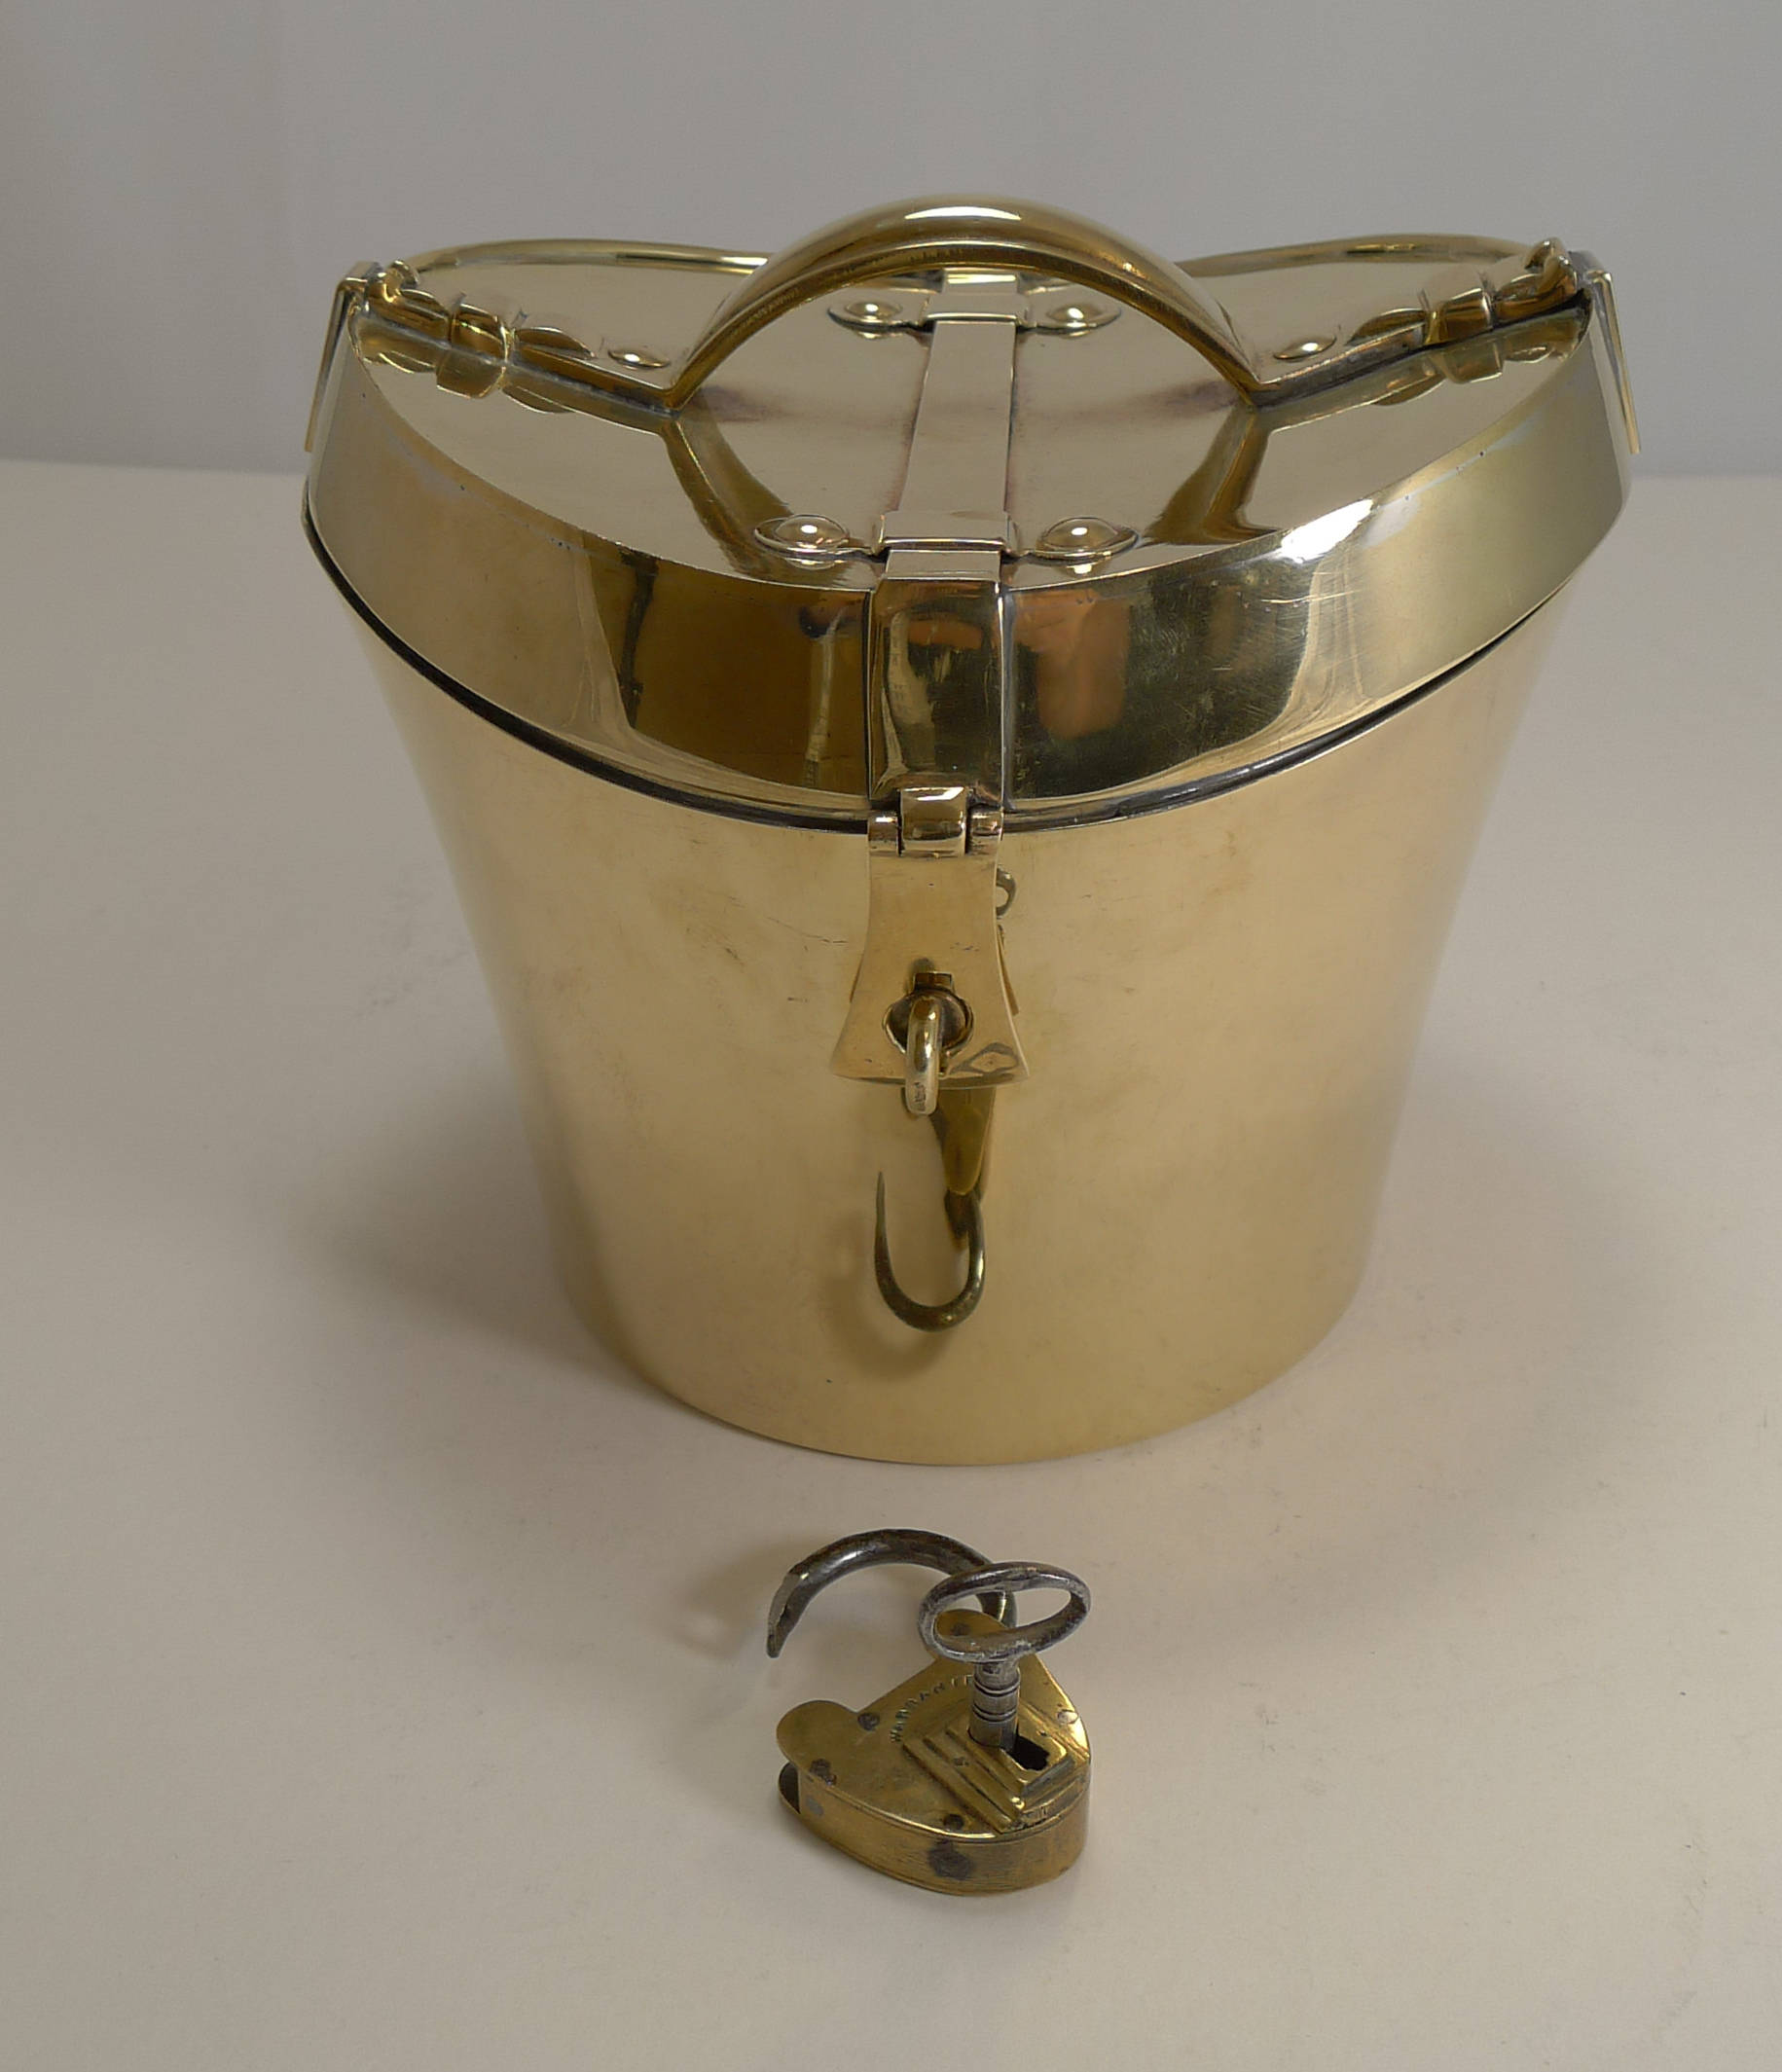 Vintage Hat Box with Hat, Early 20th Century